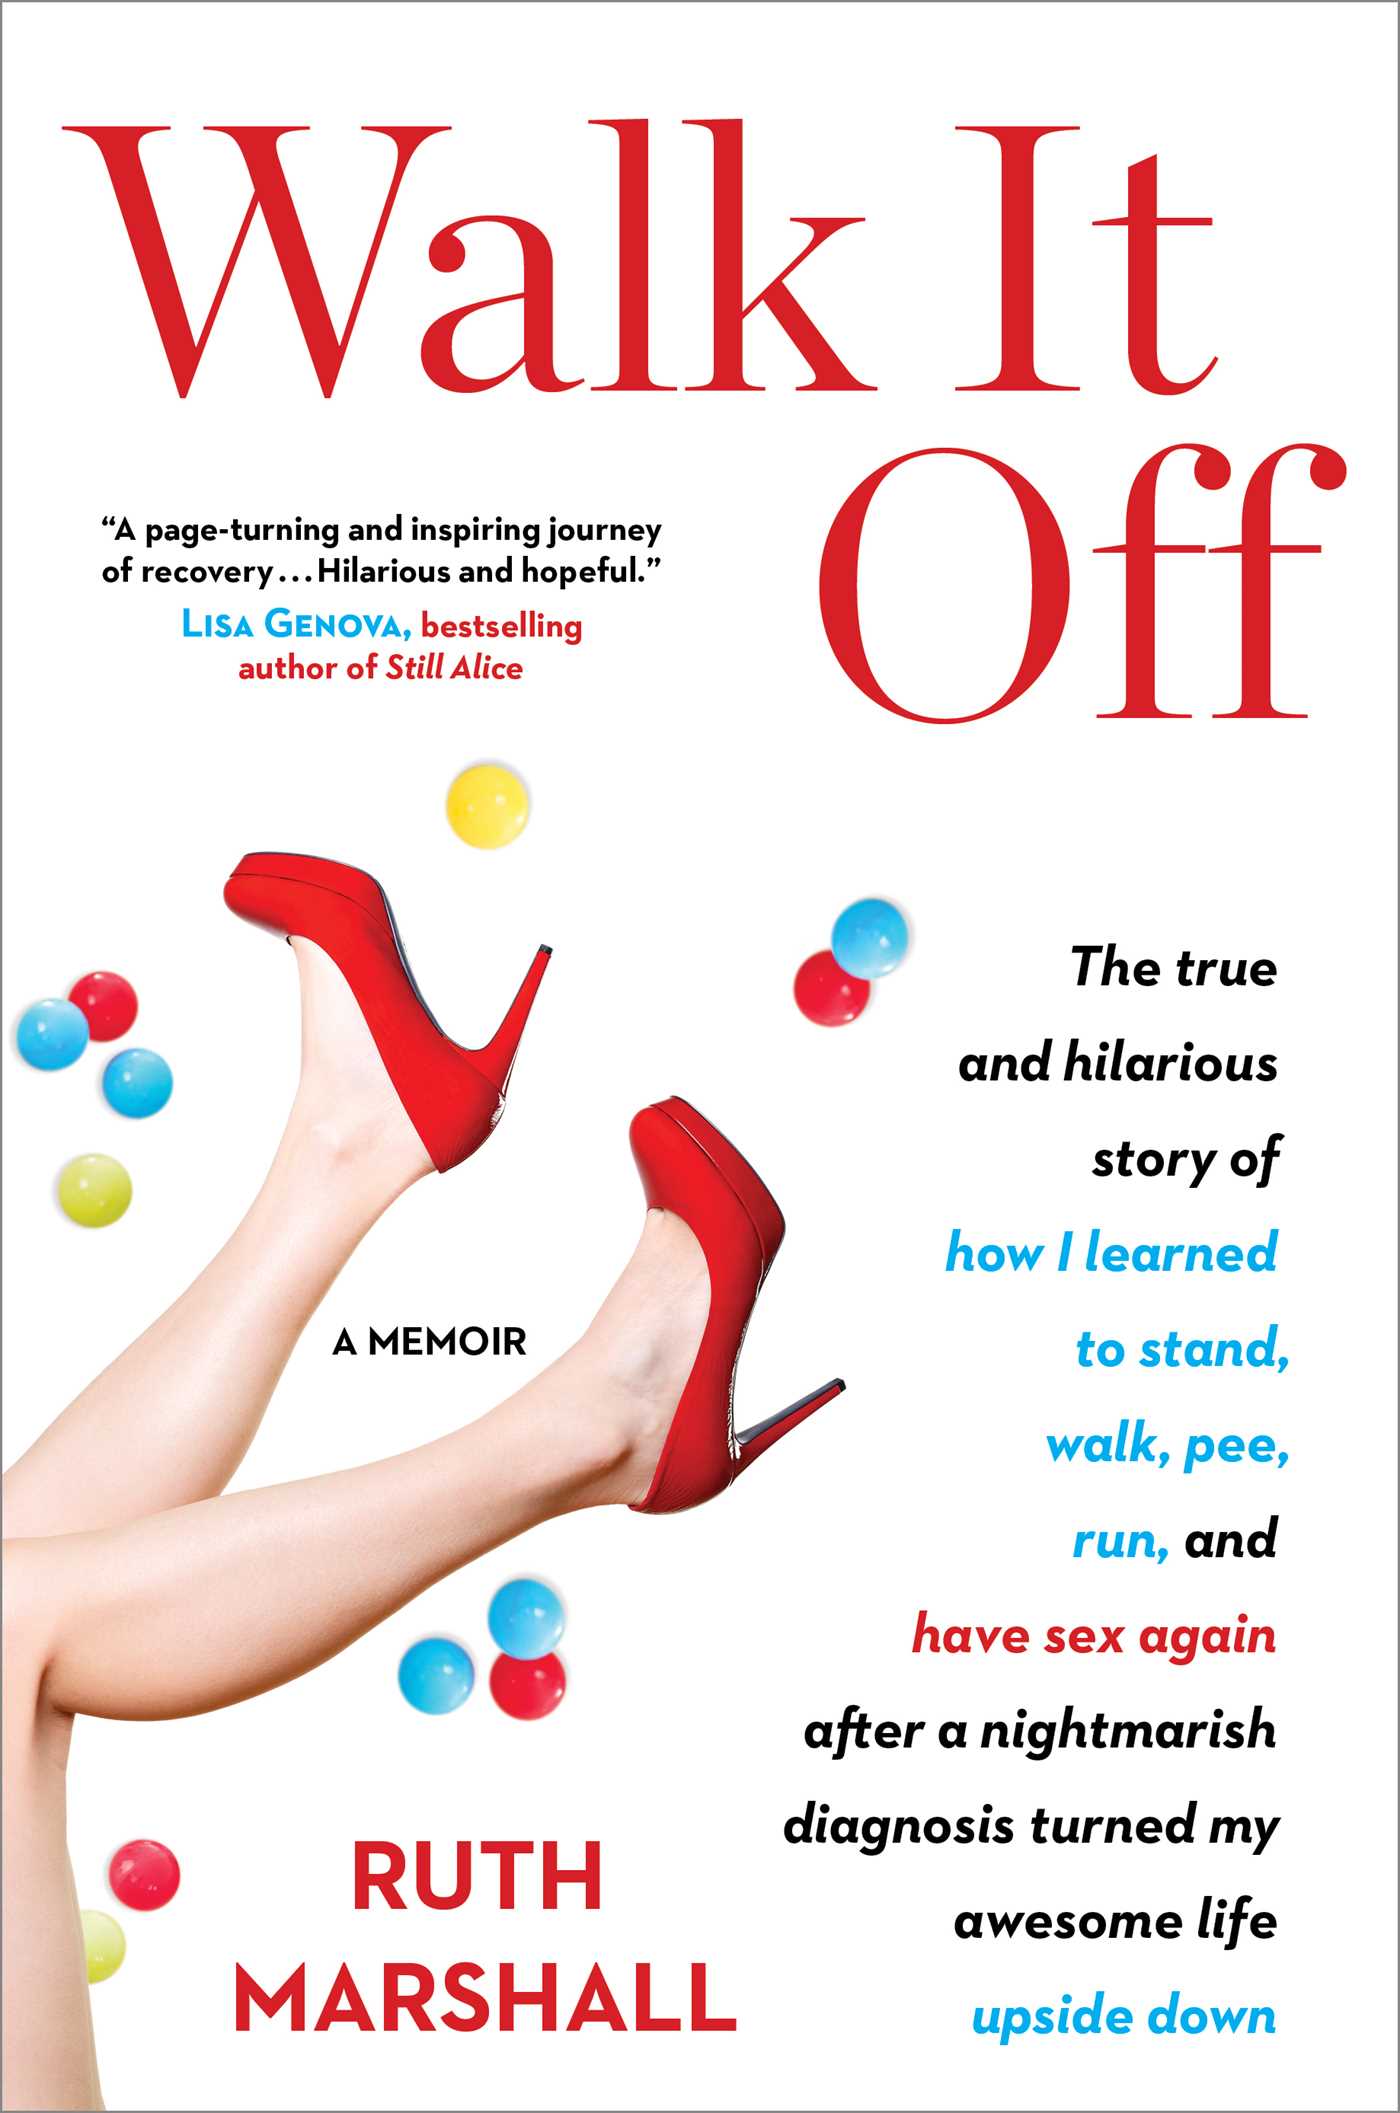 Walk It Off: The True and Hilarious Story of How I Learned to Stand, Walk, Pee, Run, and Have Sex Again After a Nightmarish Diagnosis Turned My Awesome Life Upside Down